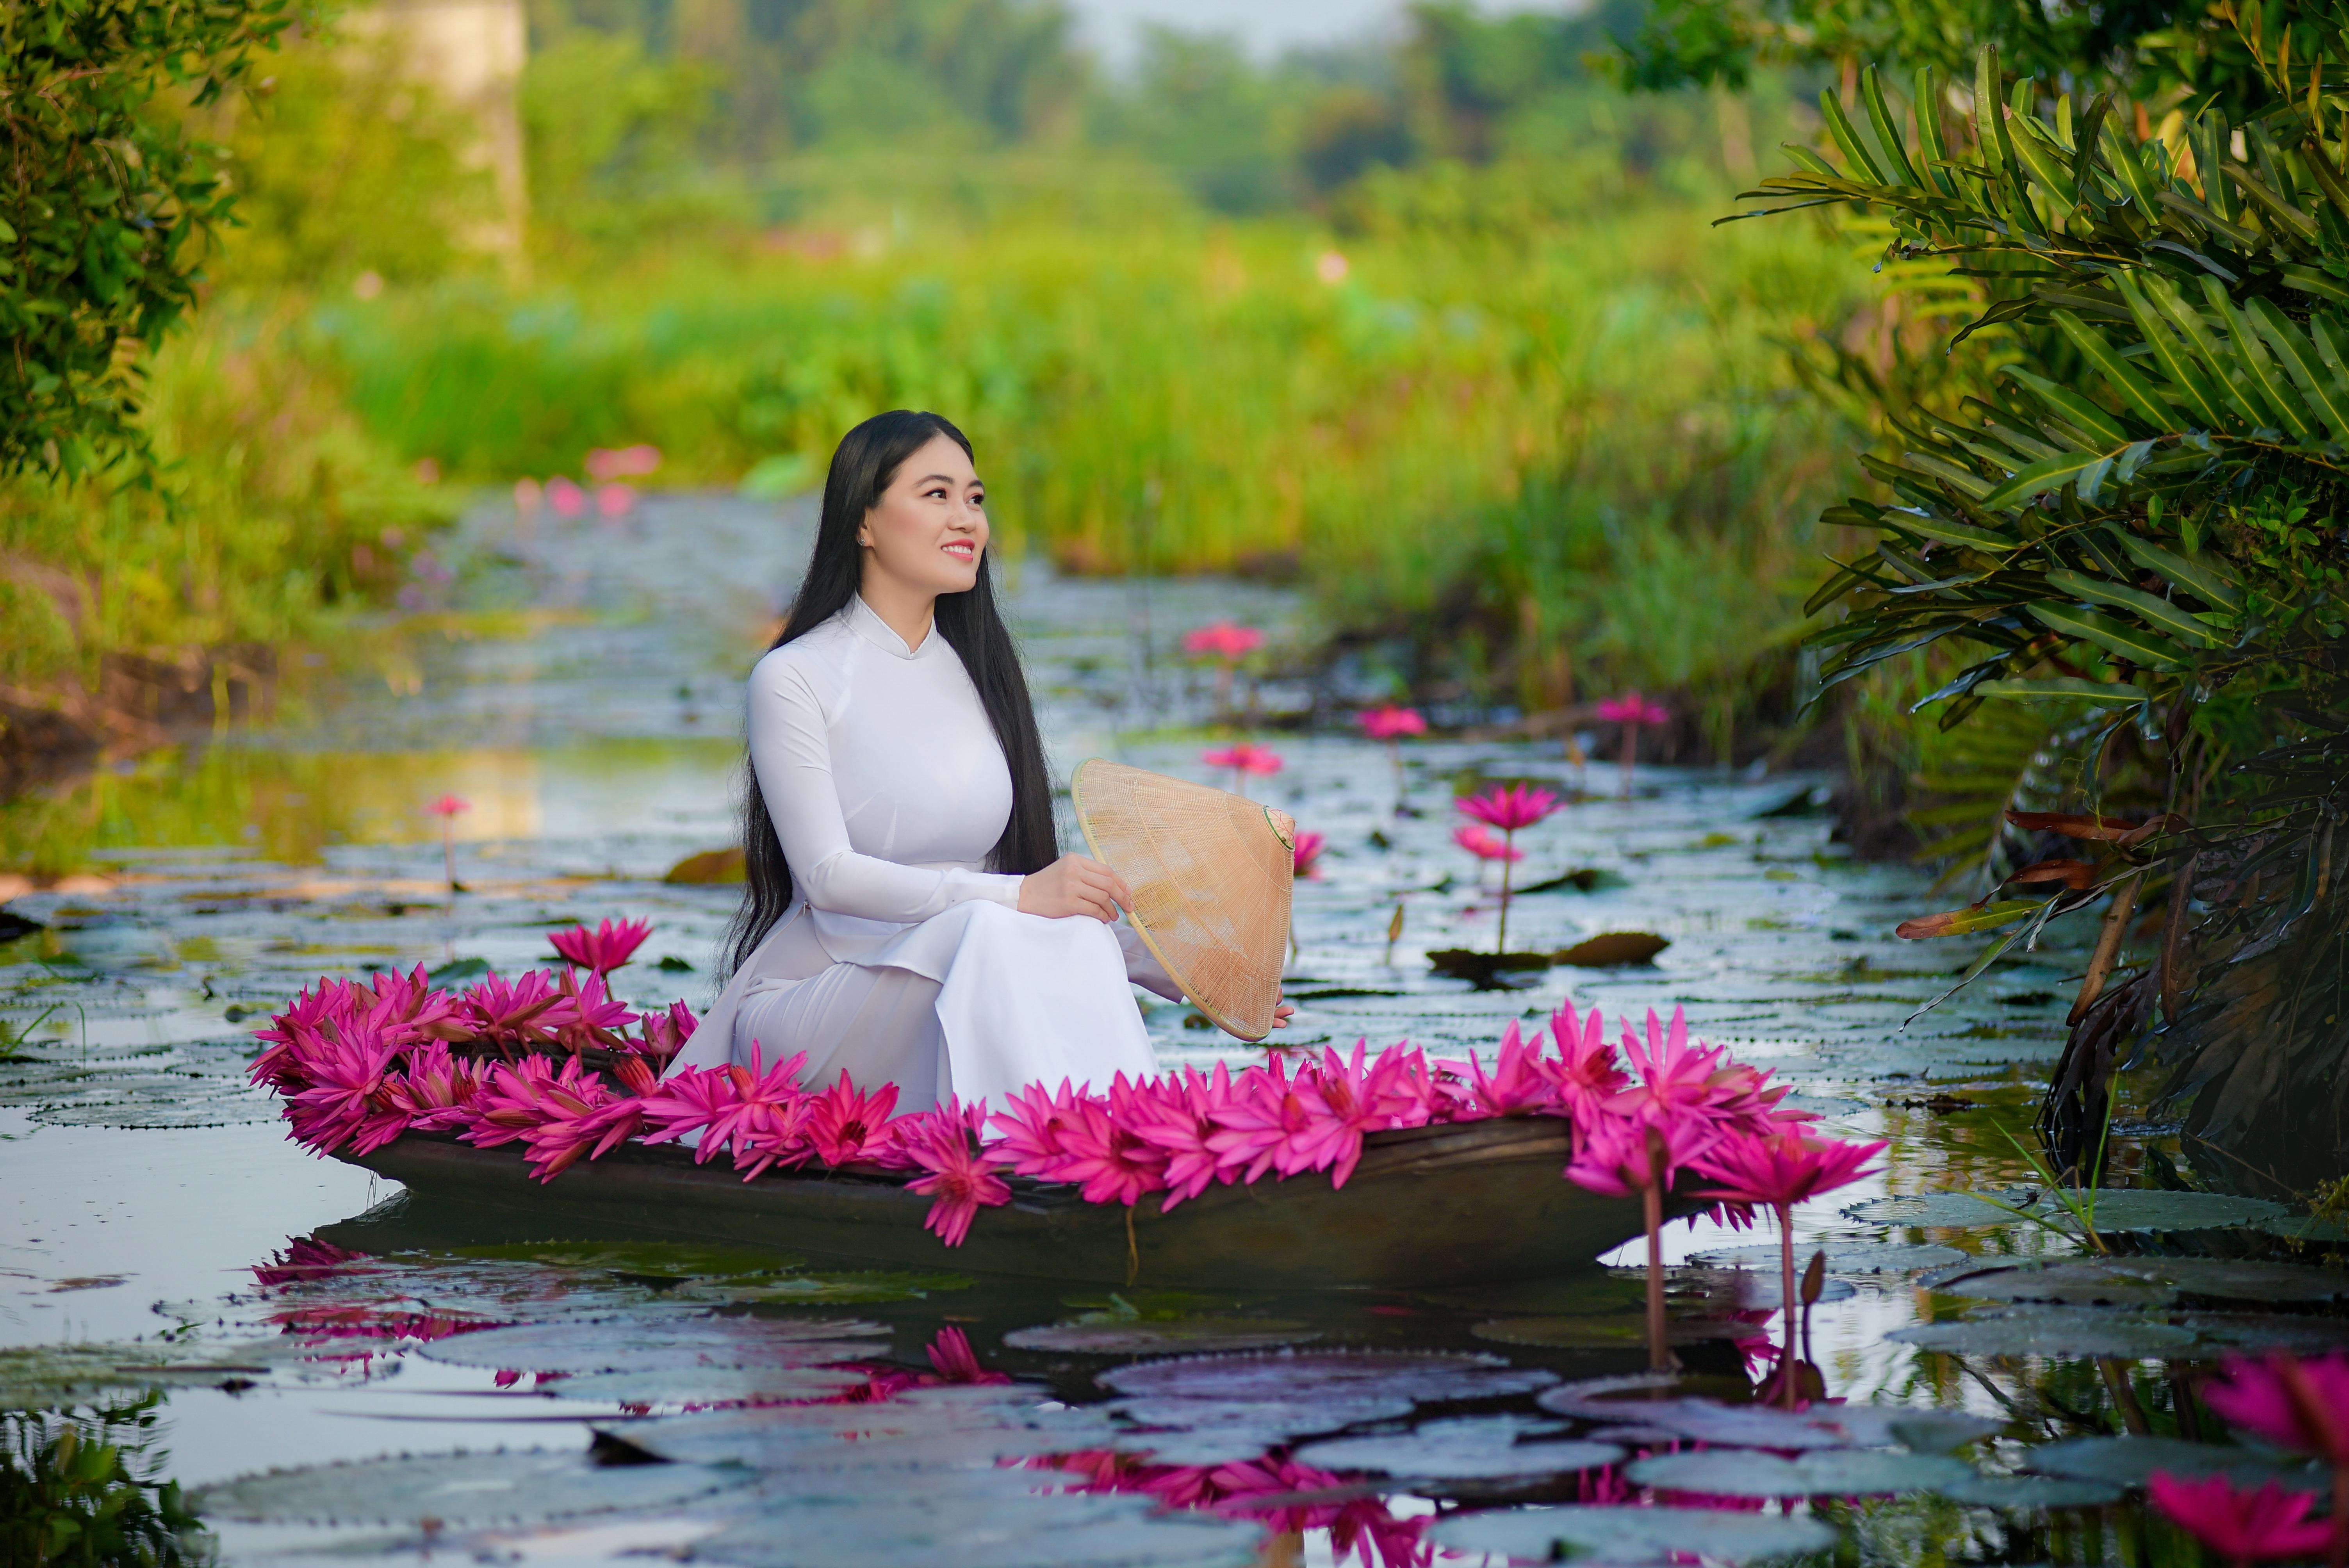 beautiful woman in a white dress sitting on a boat with pink water lilies